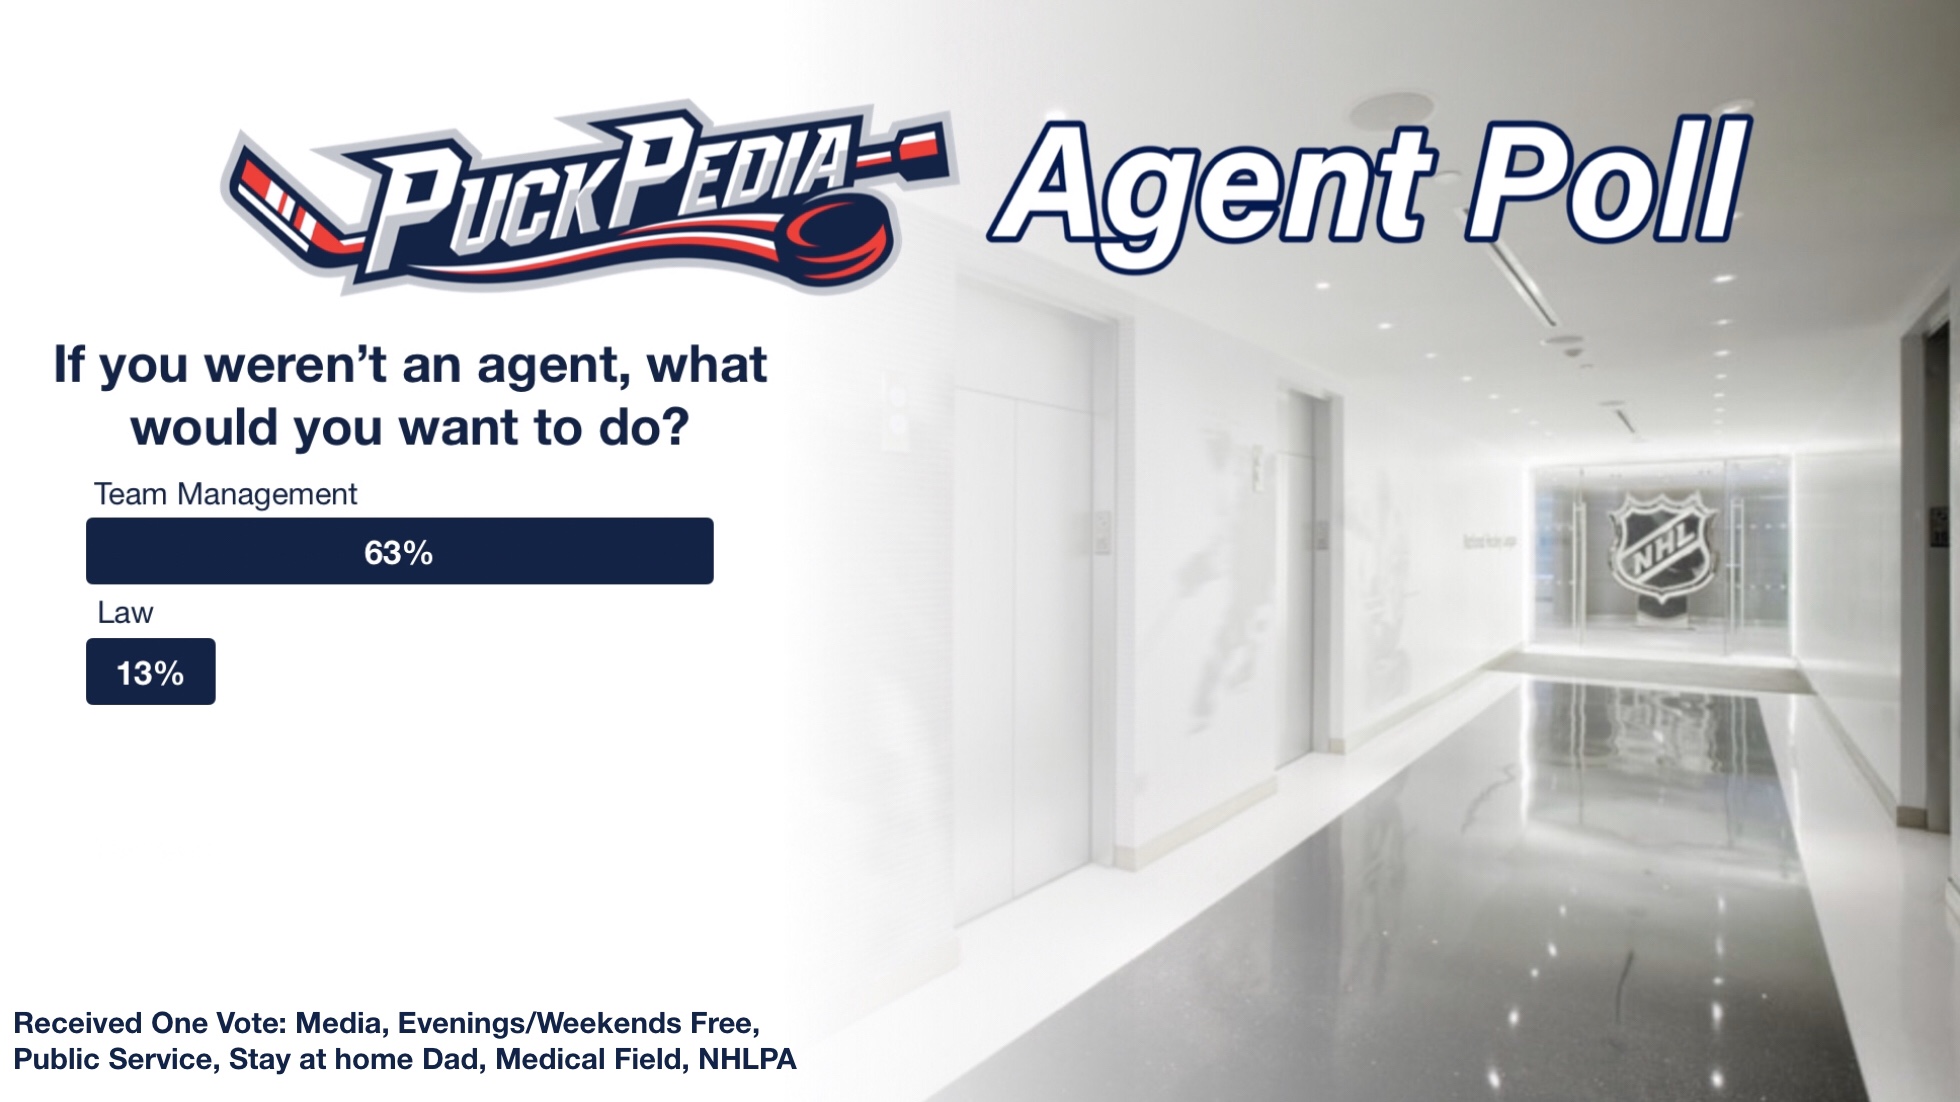 If you weren't an agent what would you want to do?